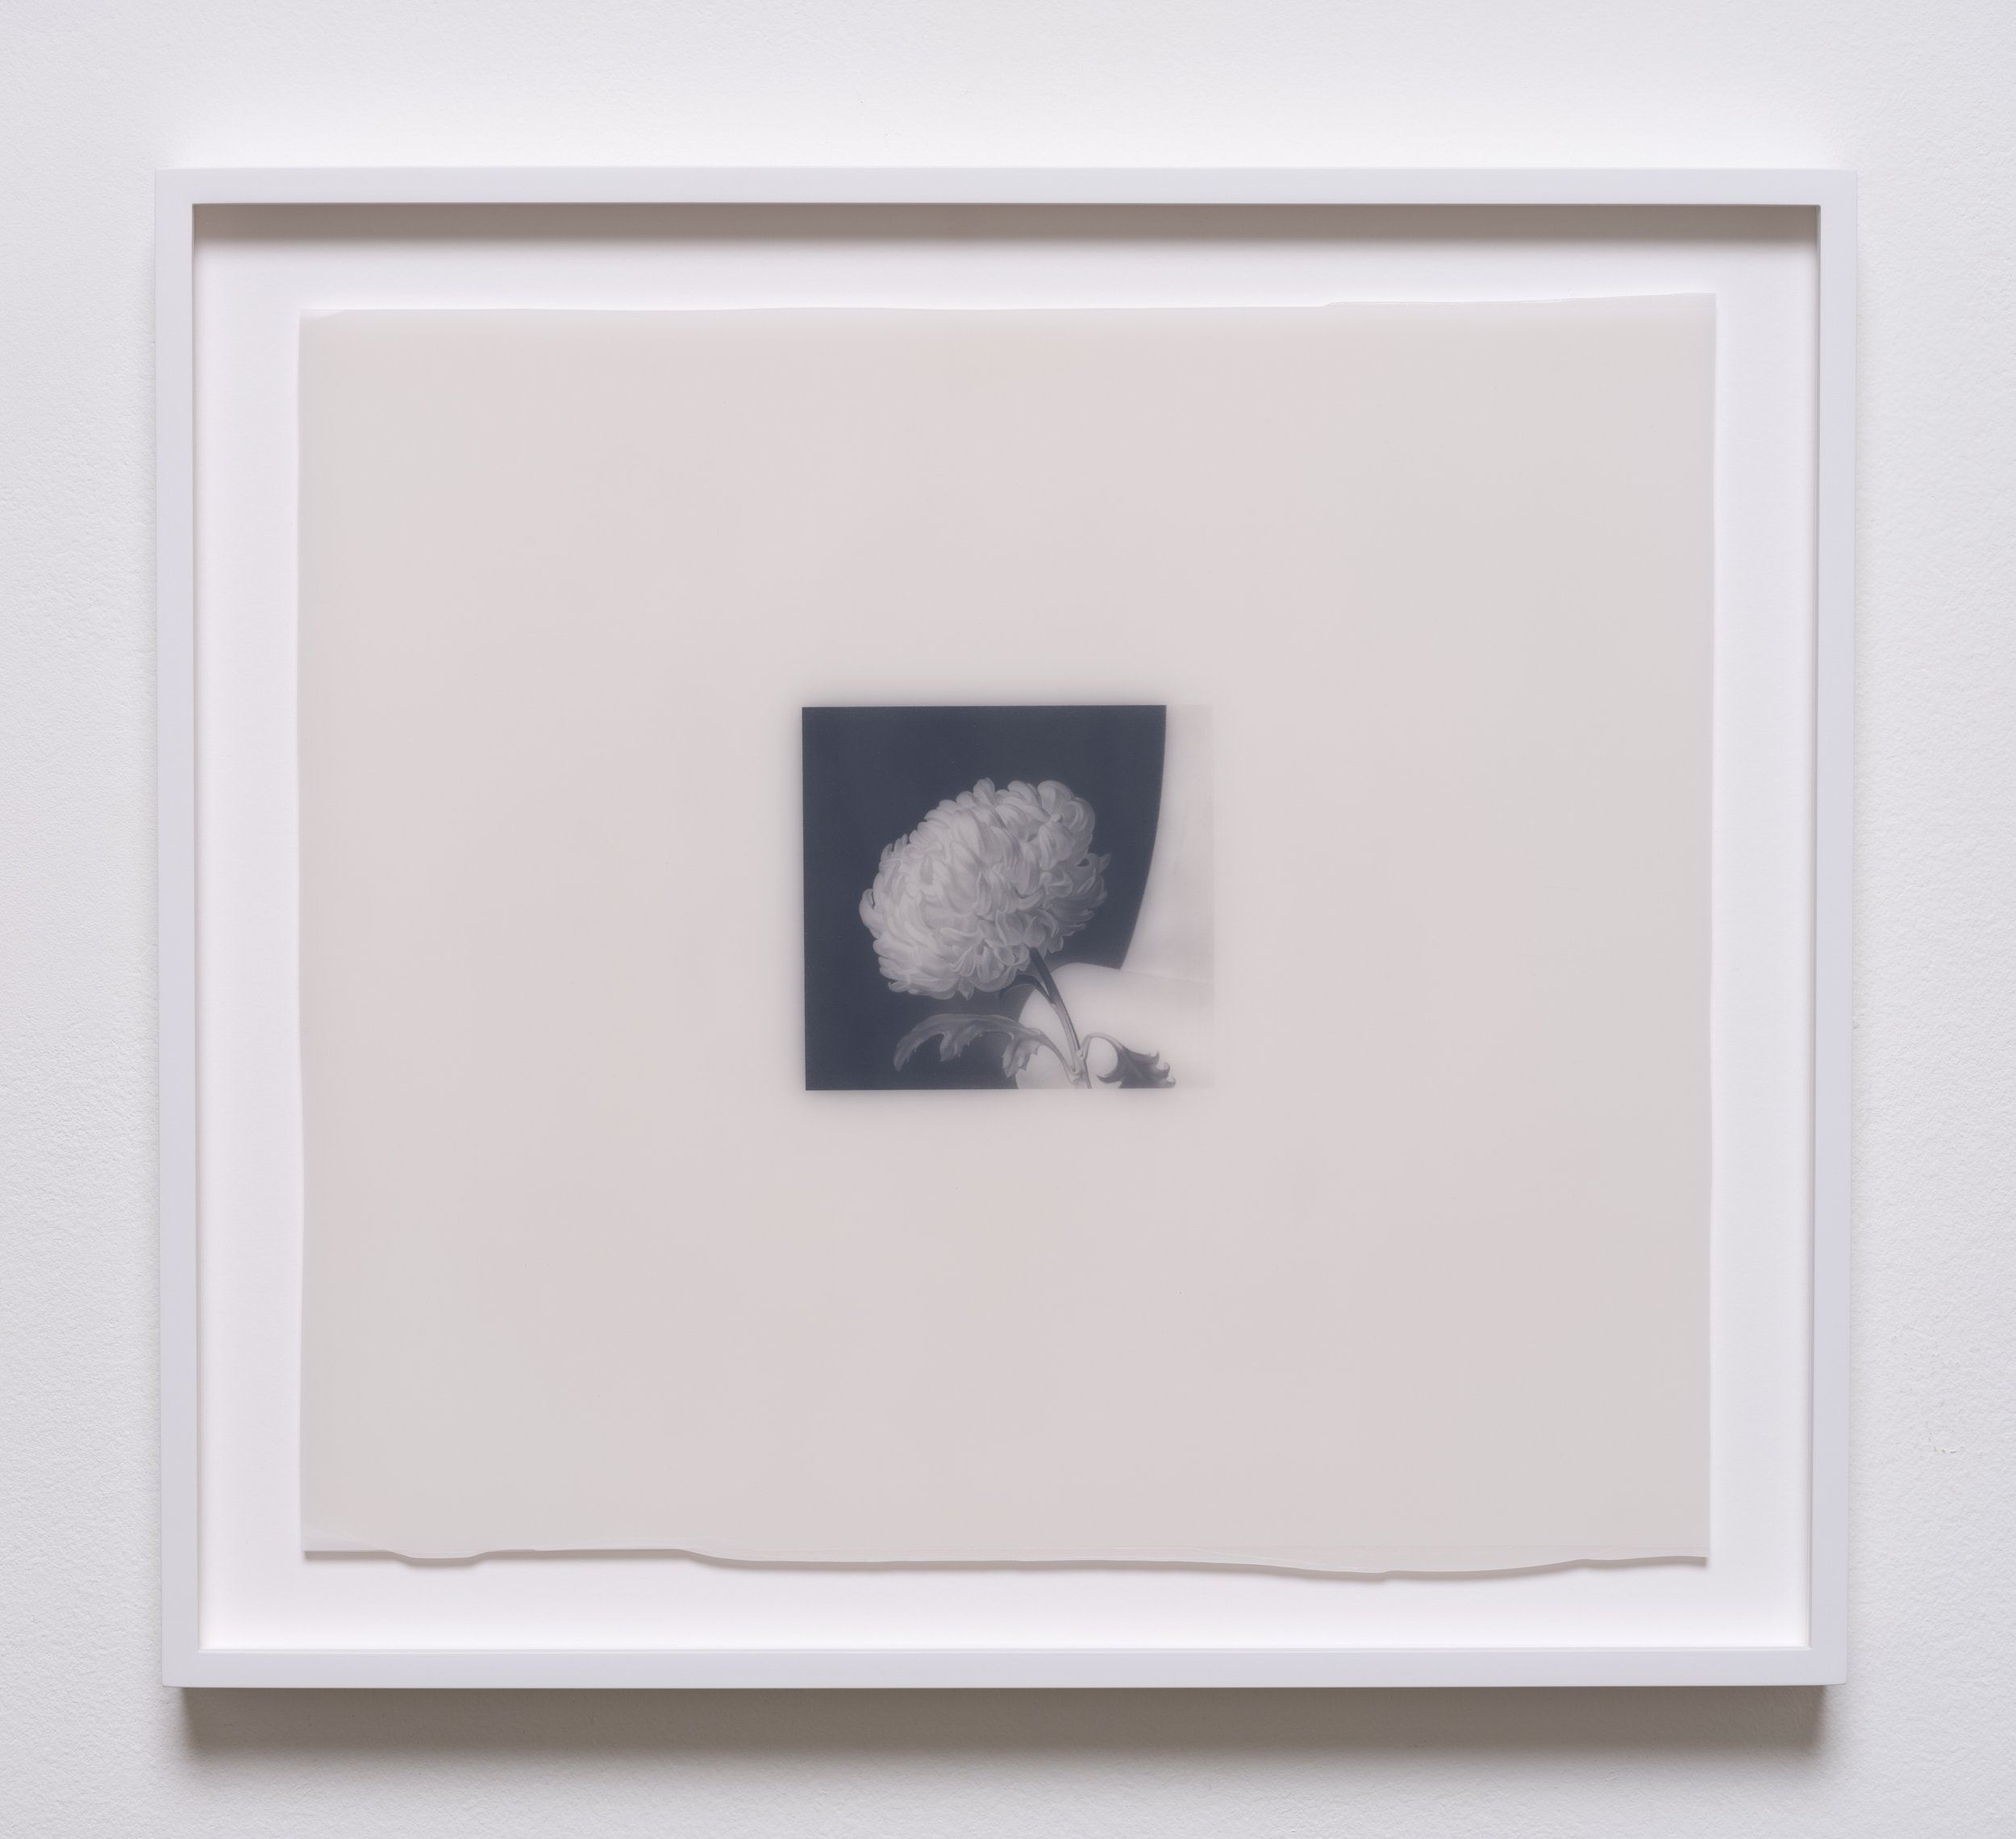   MF.1939.258.2023 , 2023 Graphite, wax, and drafting film 16 x 17 1/2 x 1 1/2 inches (framed)&nbsp; 